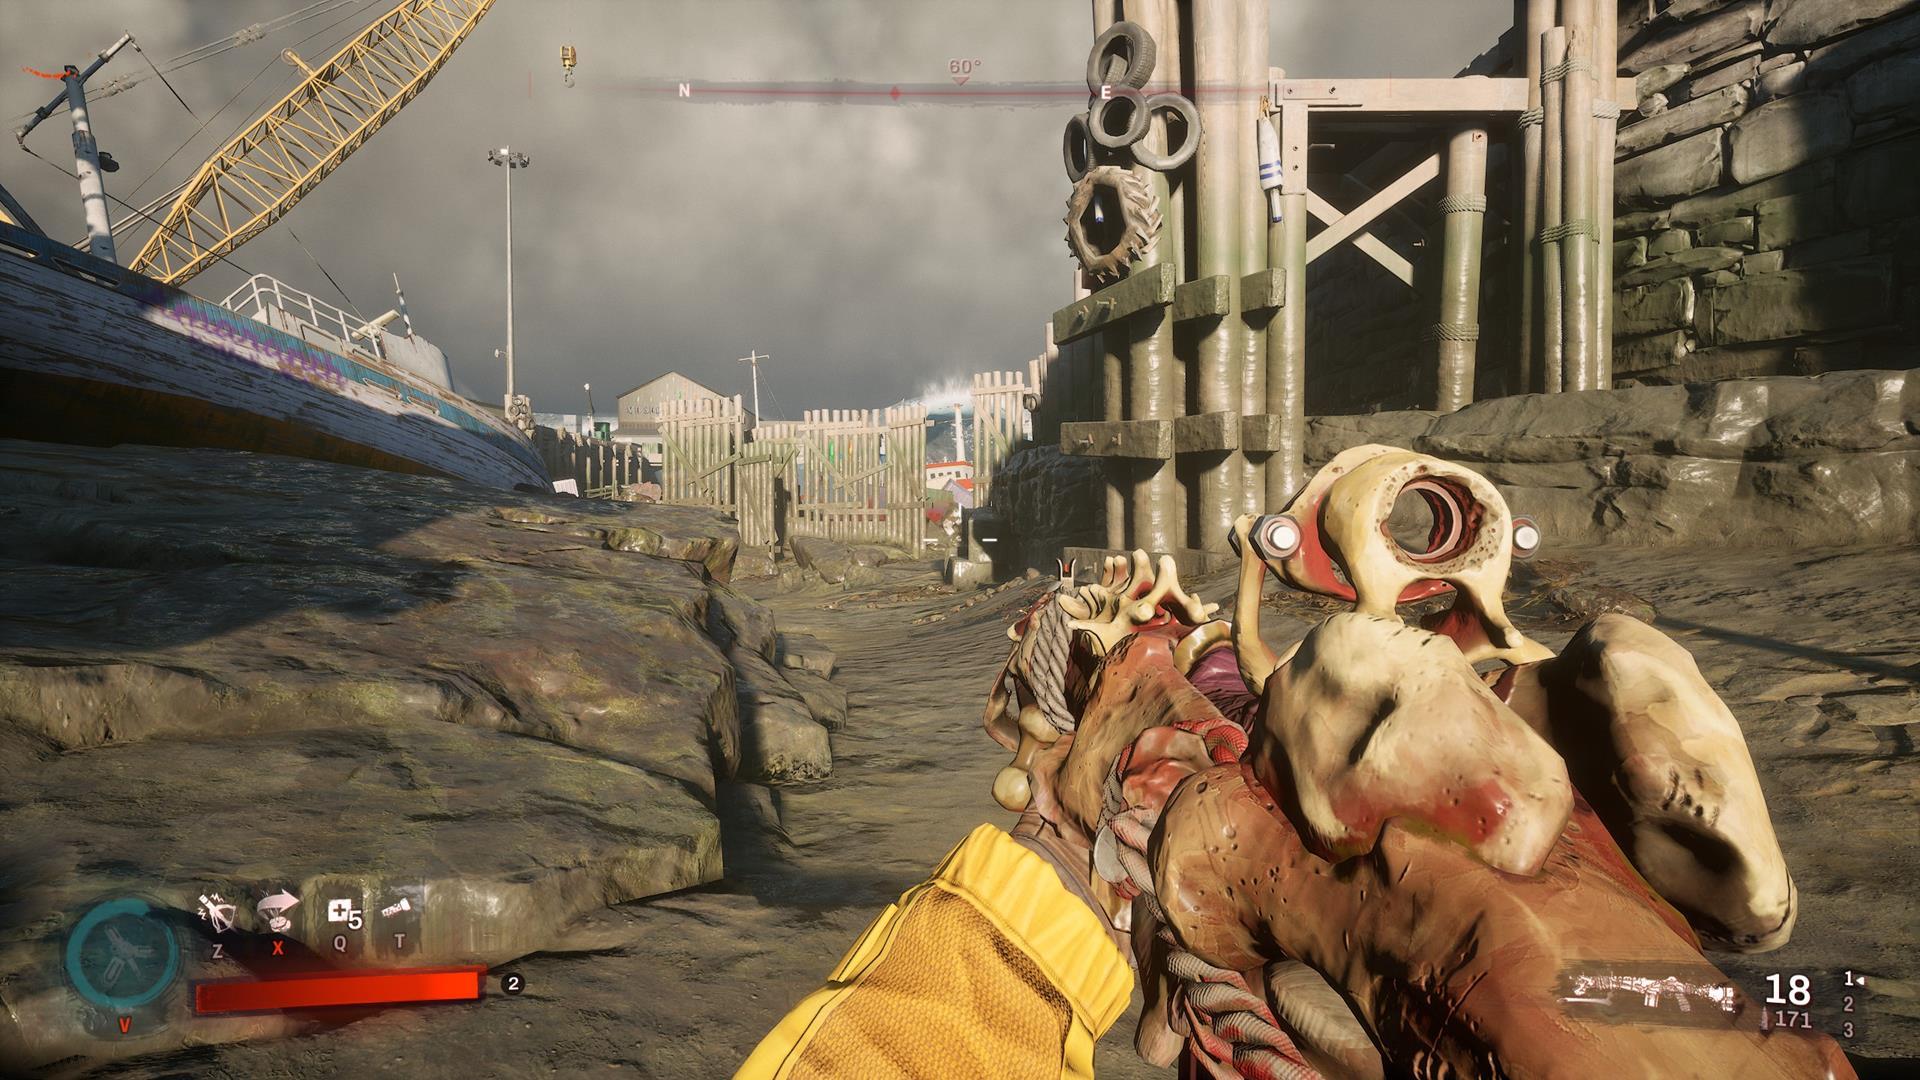 Redfall weapons: a first-person view of character wielding an organic, fleshy assault rifle with a scope.